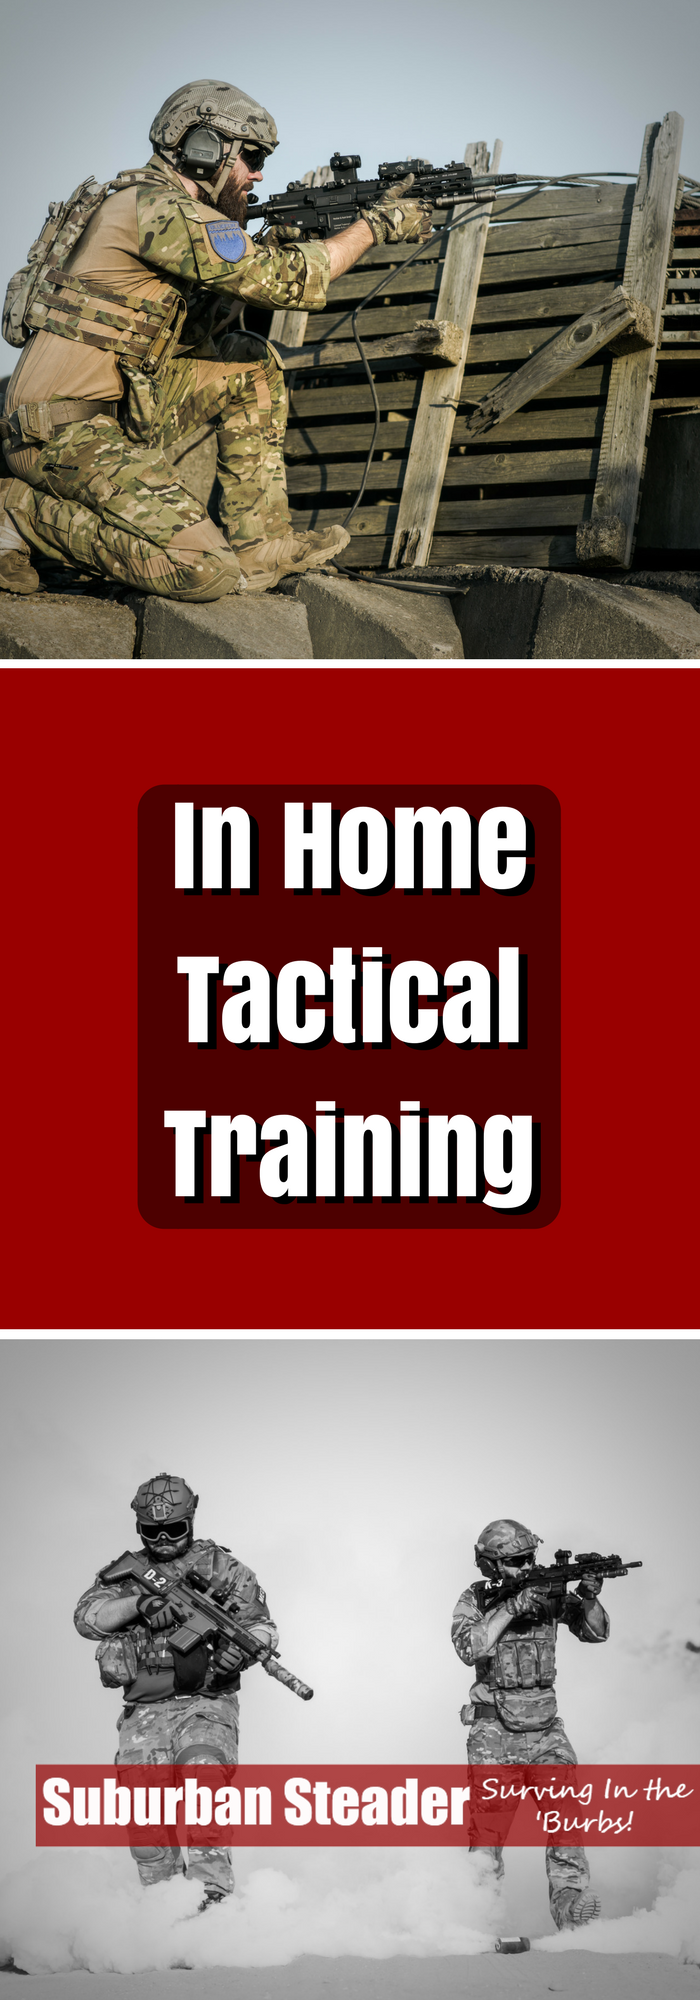 In Home Tactical Training